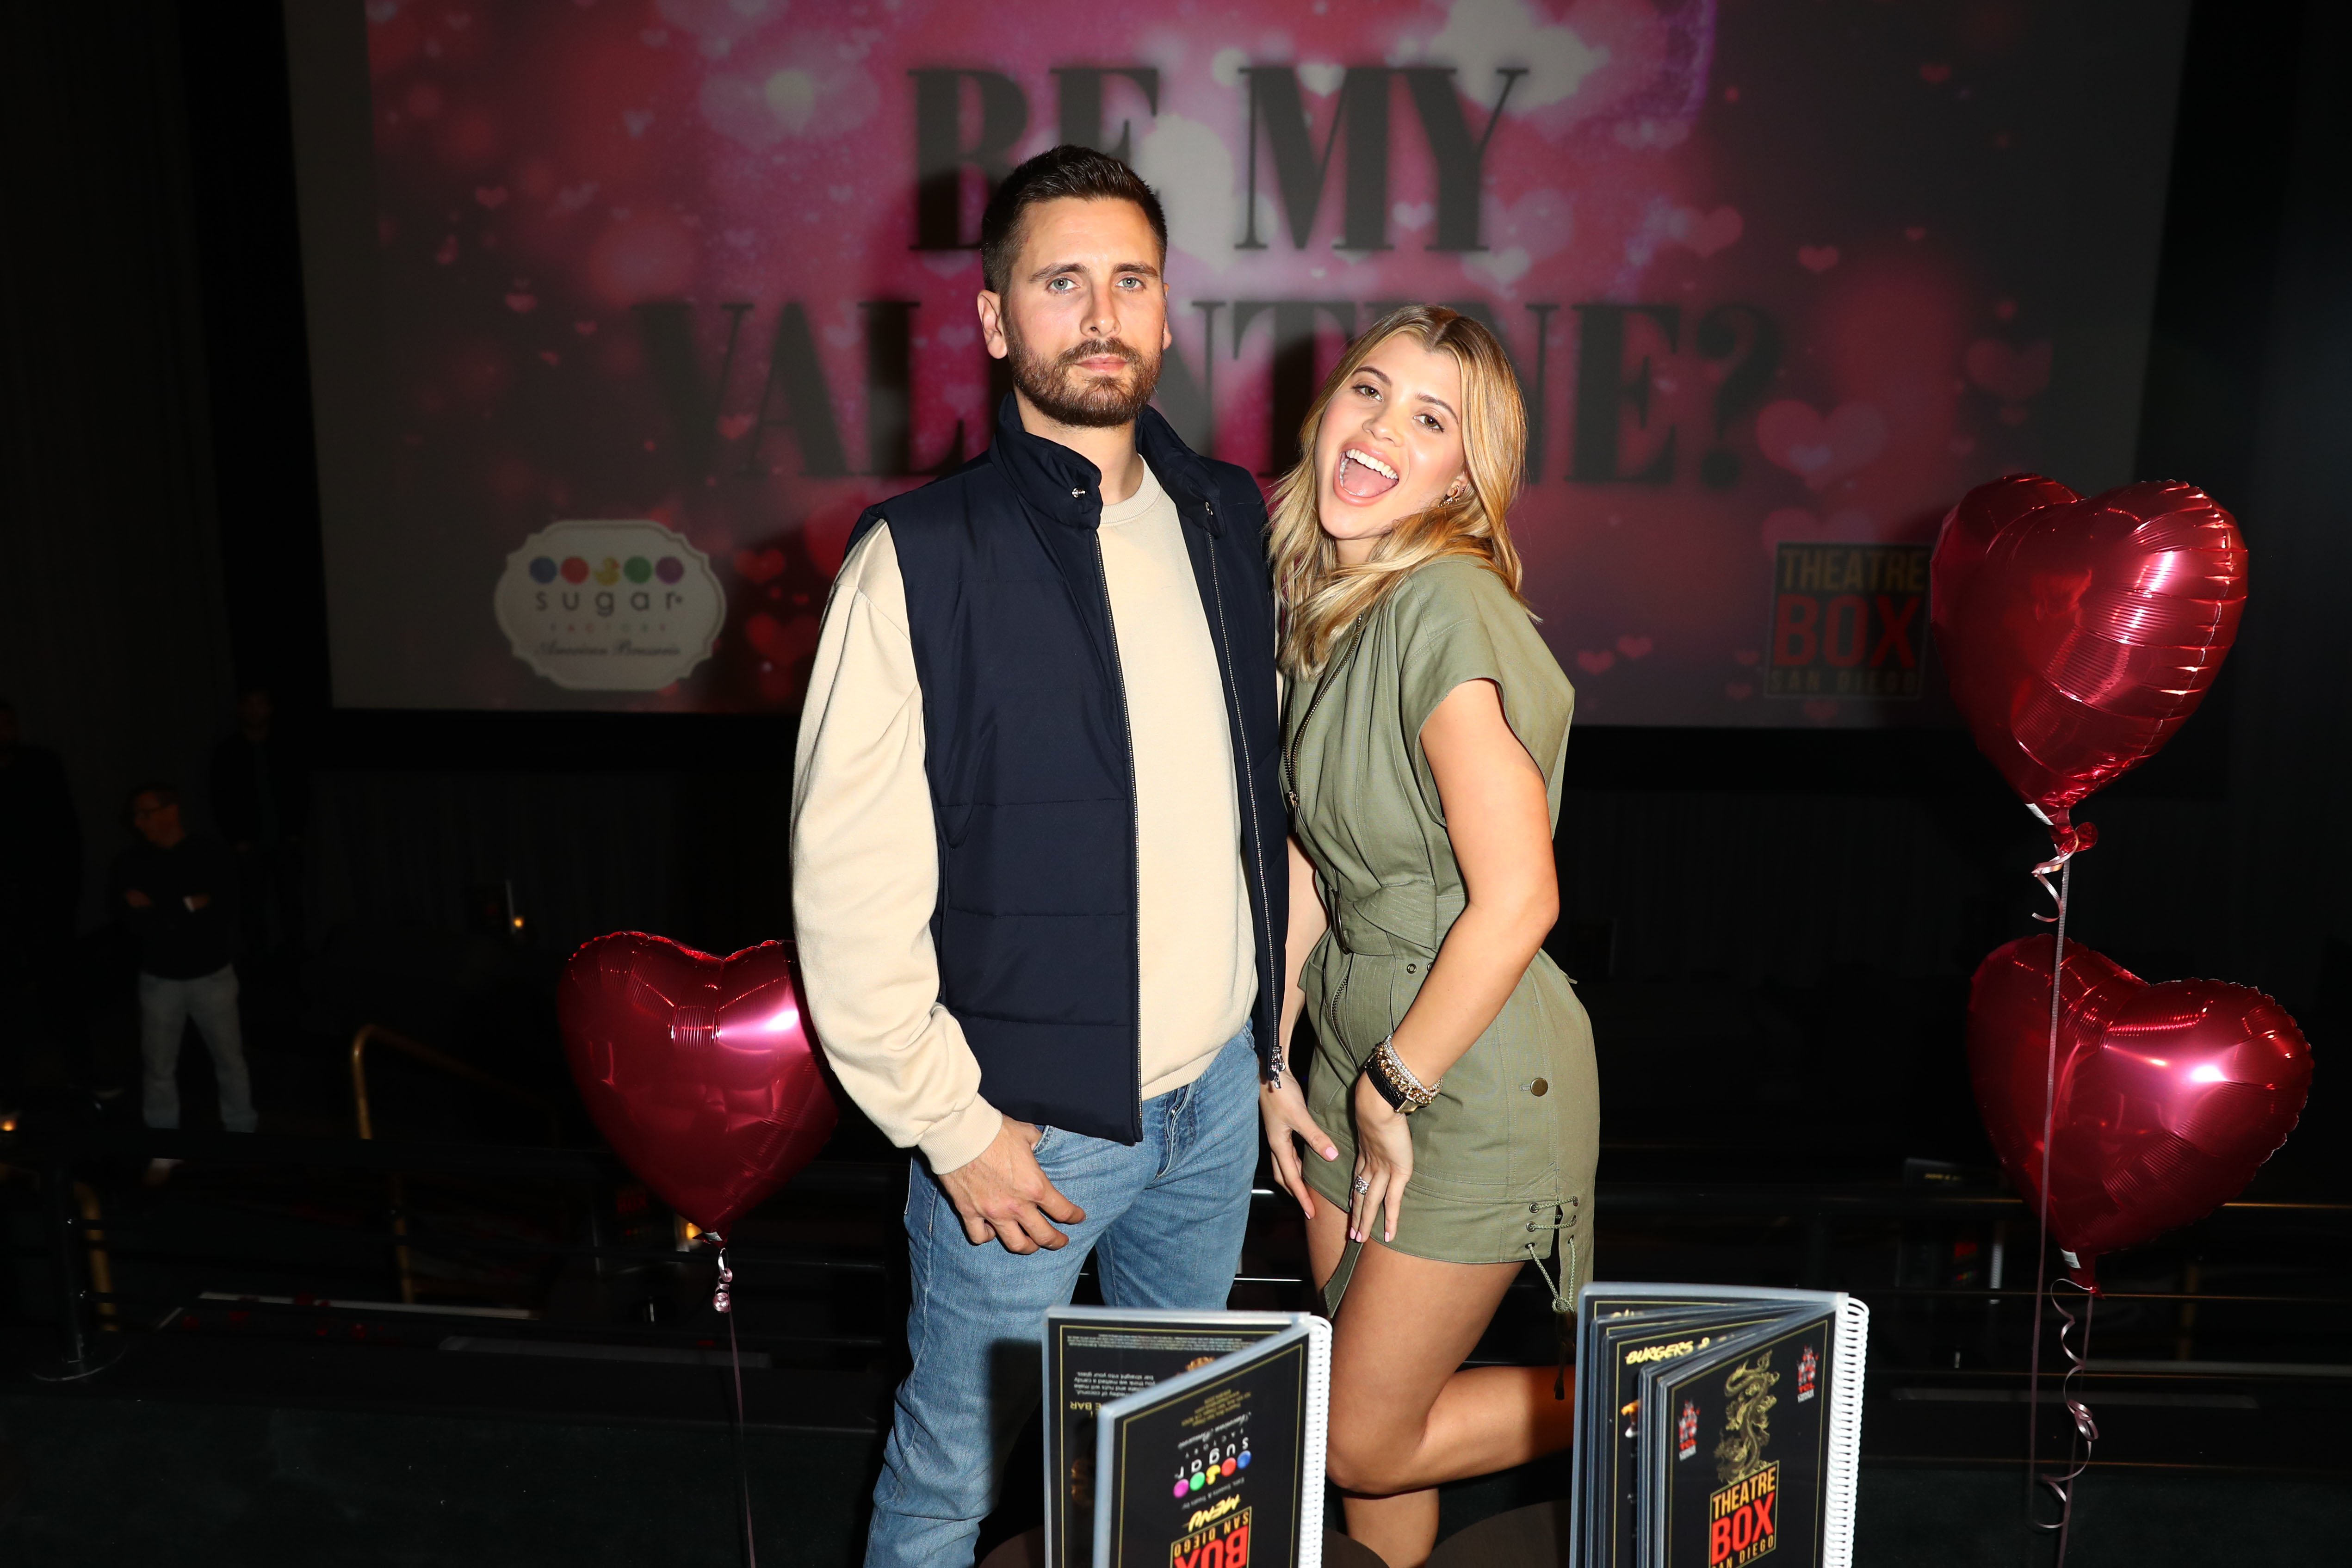 Scott Disick and Sofia Richie celebrate Valentine's Day at San Diego's new Theatre Box® Entertainment Complex on February 14, 2019, in San Diego, California. | Source: Getty Images.